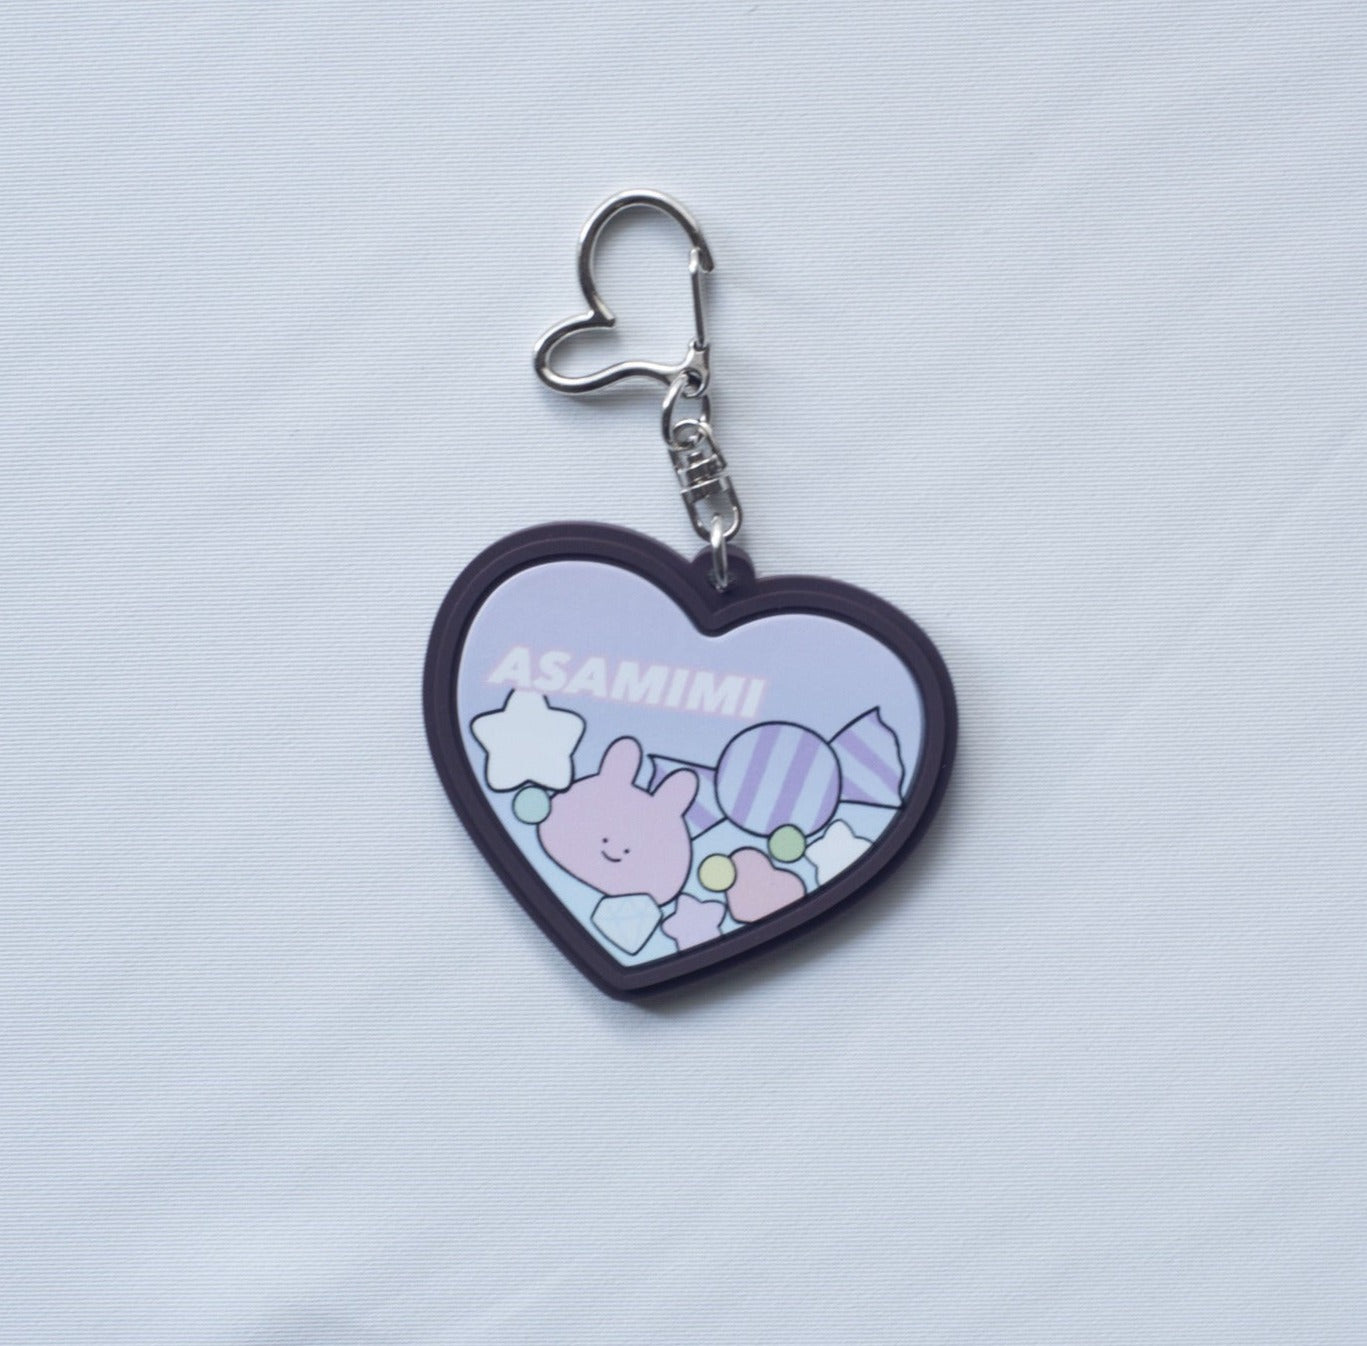 [Asamimi-chan] Rubber key chain [Made to order]